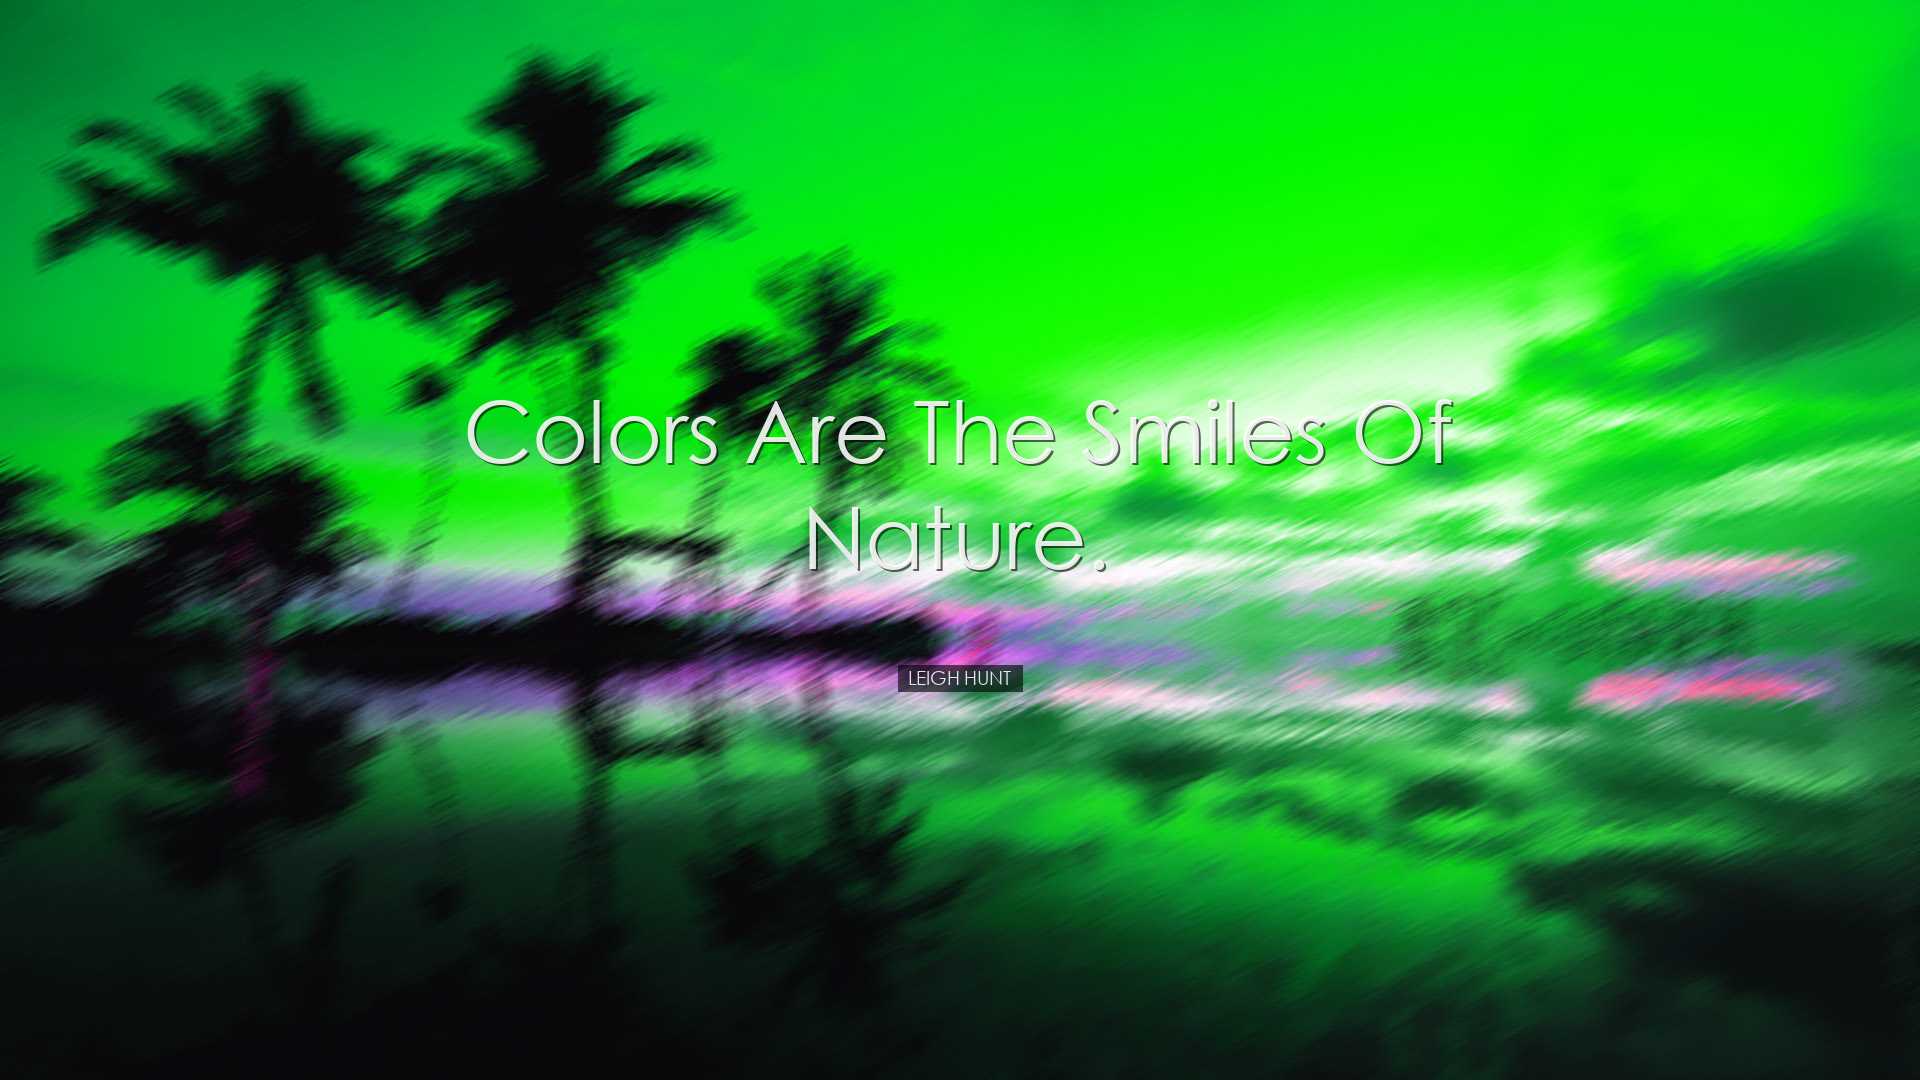 Colors are the smiles of nature. - Leigh Hunt